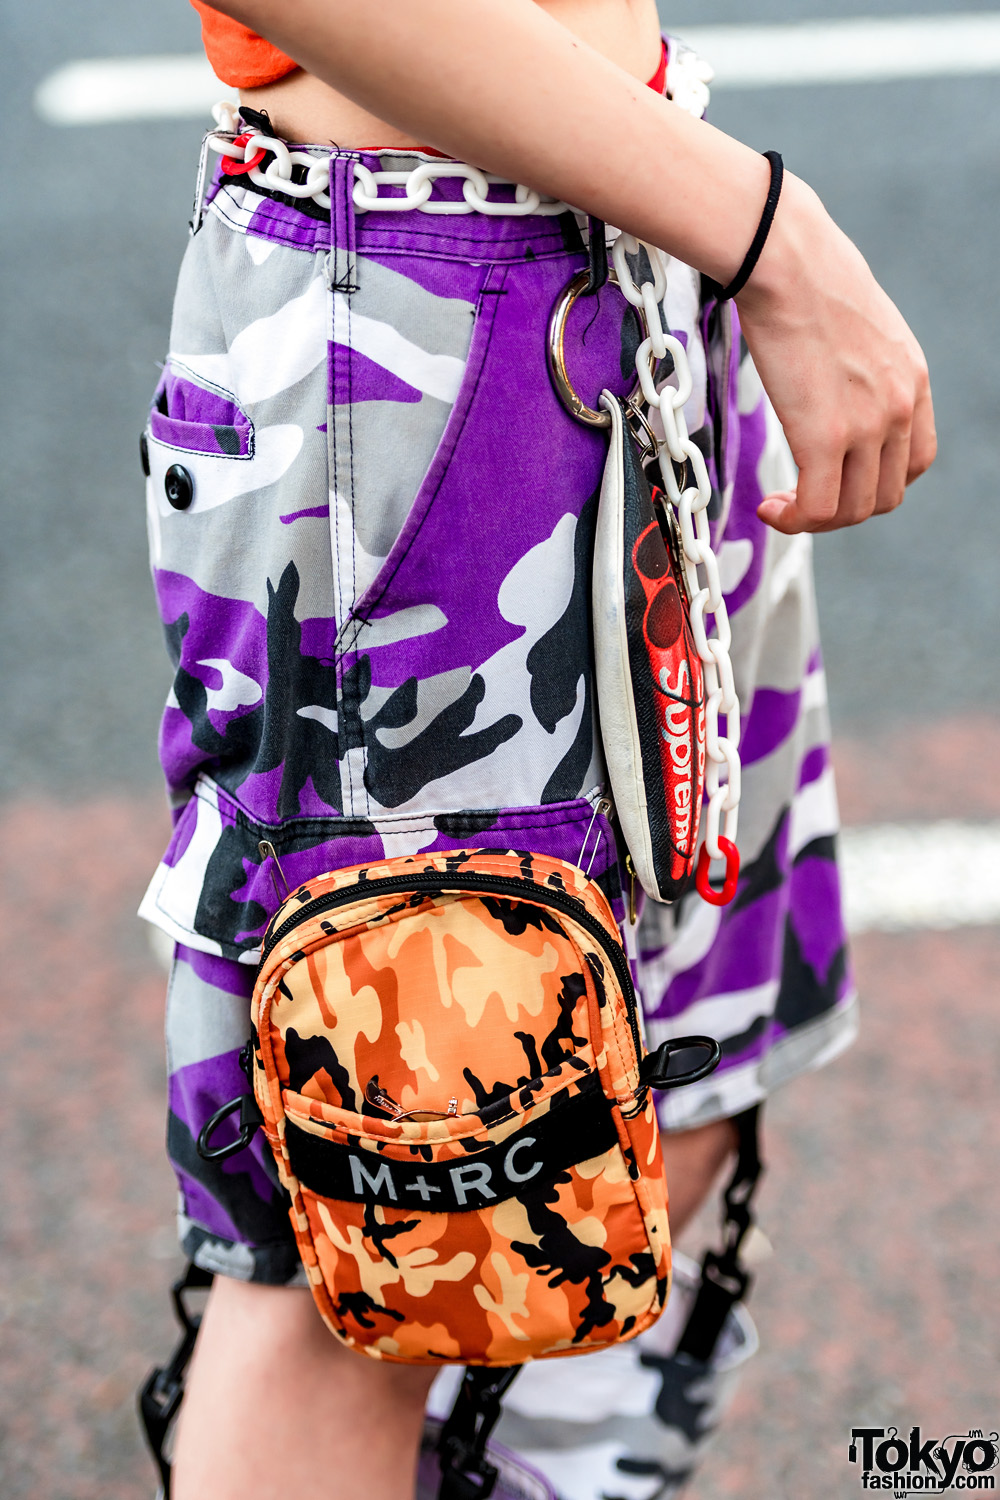 Harajuku Cut Out Remake Street Style w/ Cropped Shirt, Supreme, Camo Pants,  Vans Sneakers & M+RC Noir Camouflage Pouch – Tokyo Fashion